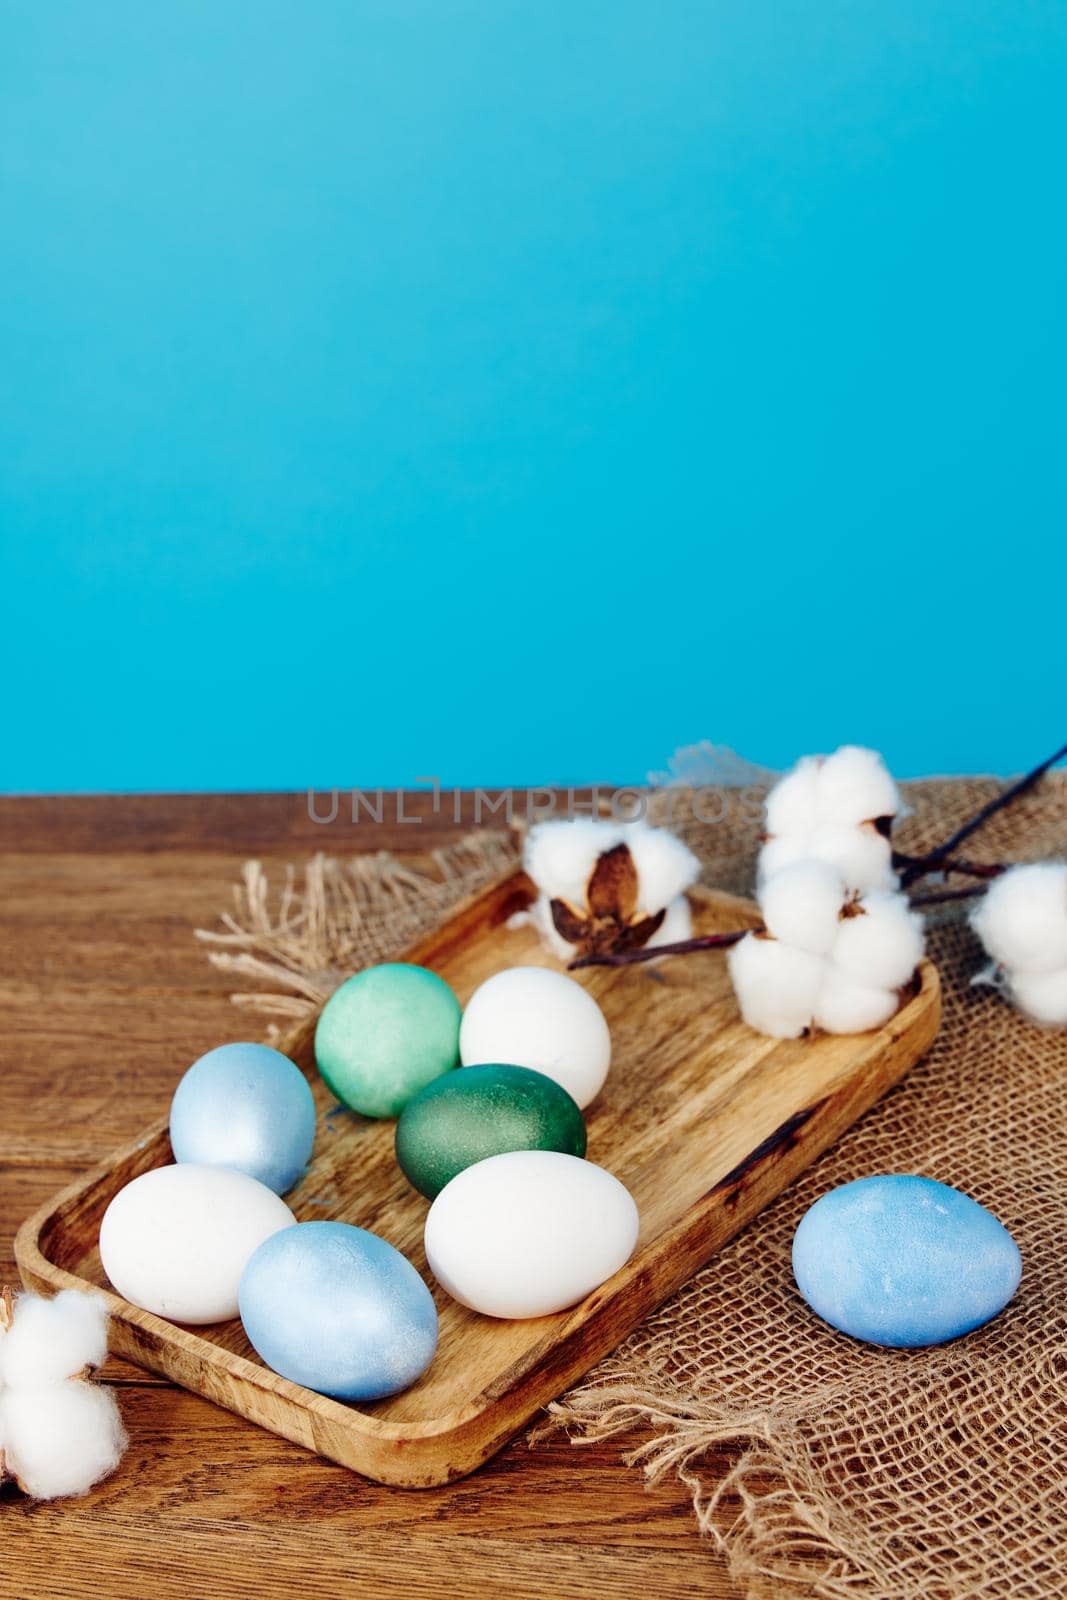 painted eggs holiday tradition spring easter blue background by SHOTPRIME